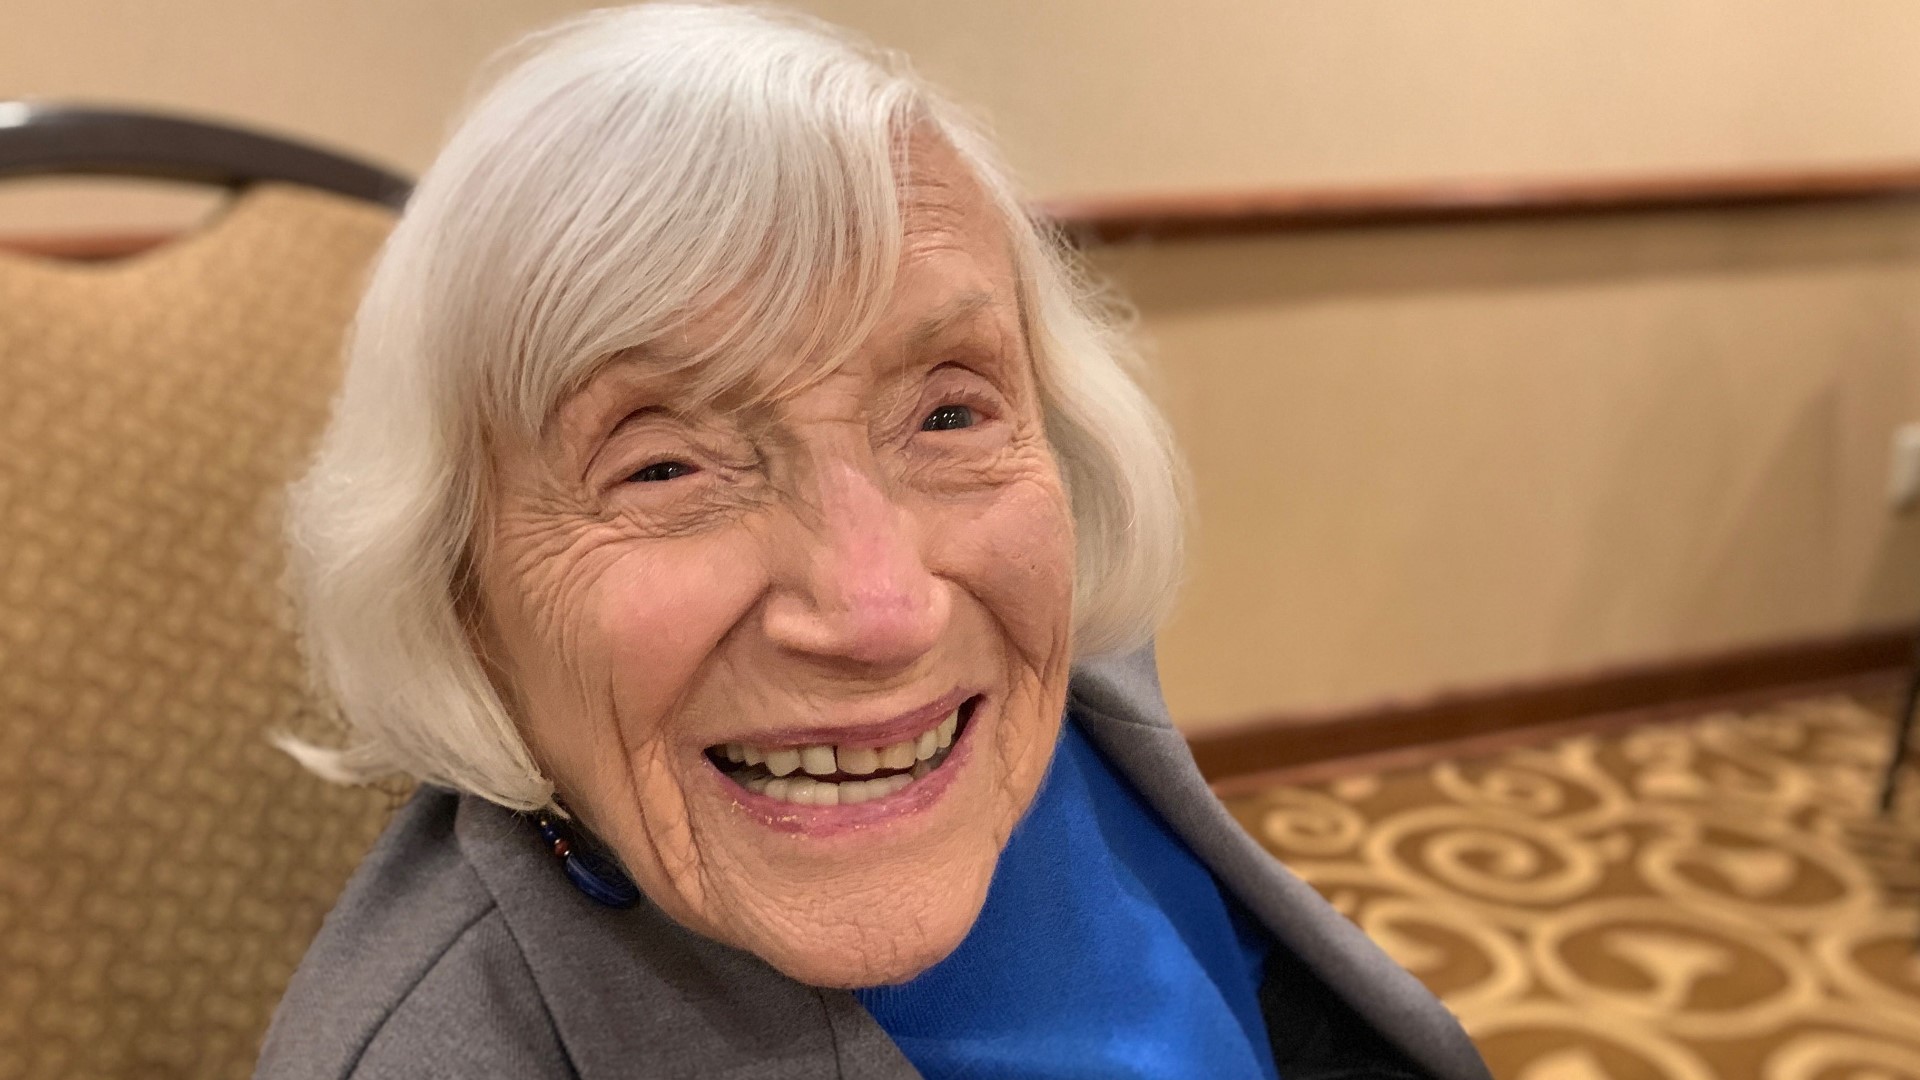 99-year-old Marthe Cohn, whose sister and fiance were killed by Nazis, shares her story of loss and being a Jewish spy in Germany.